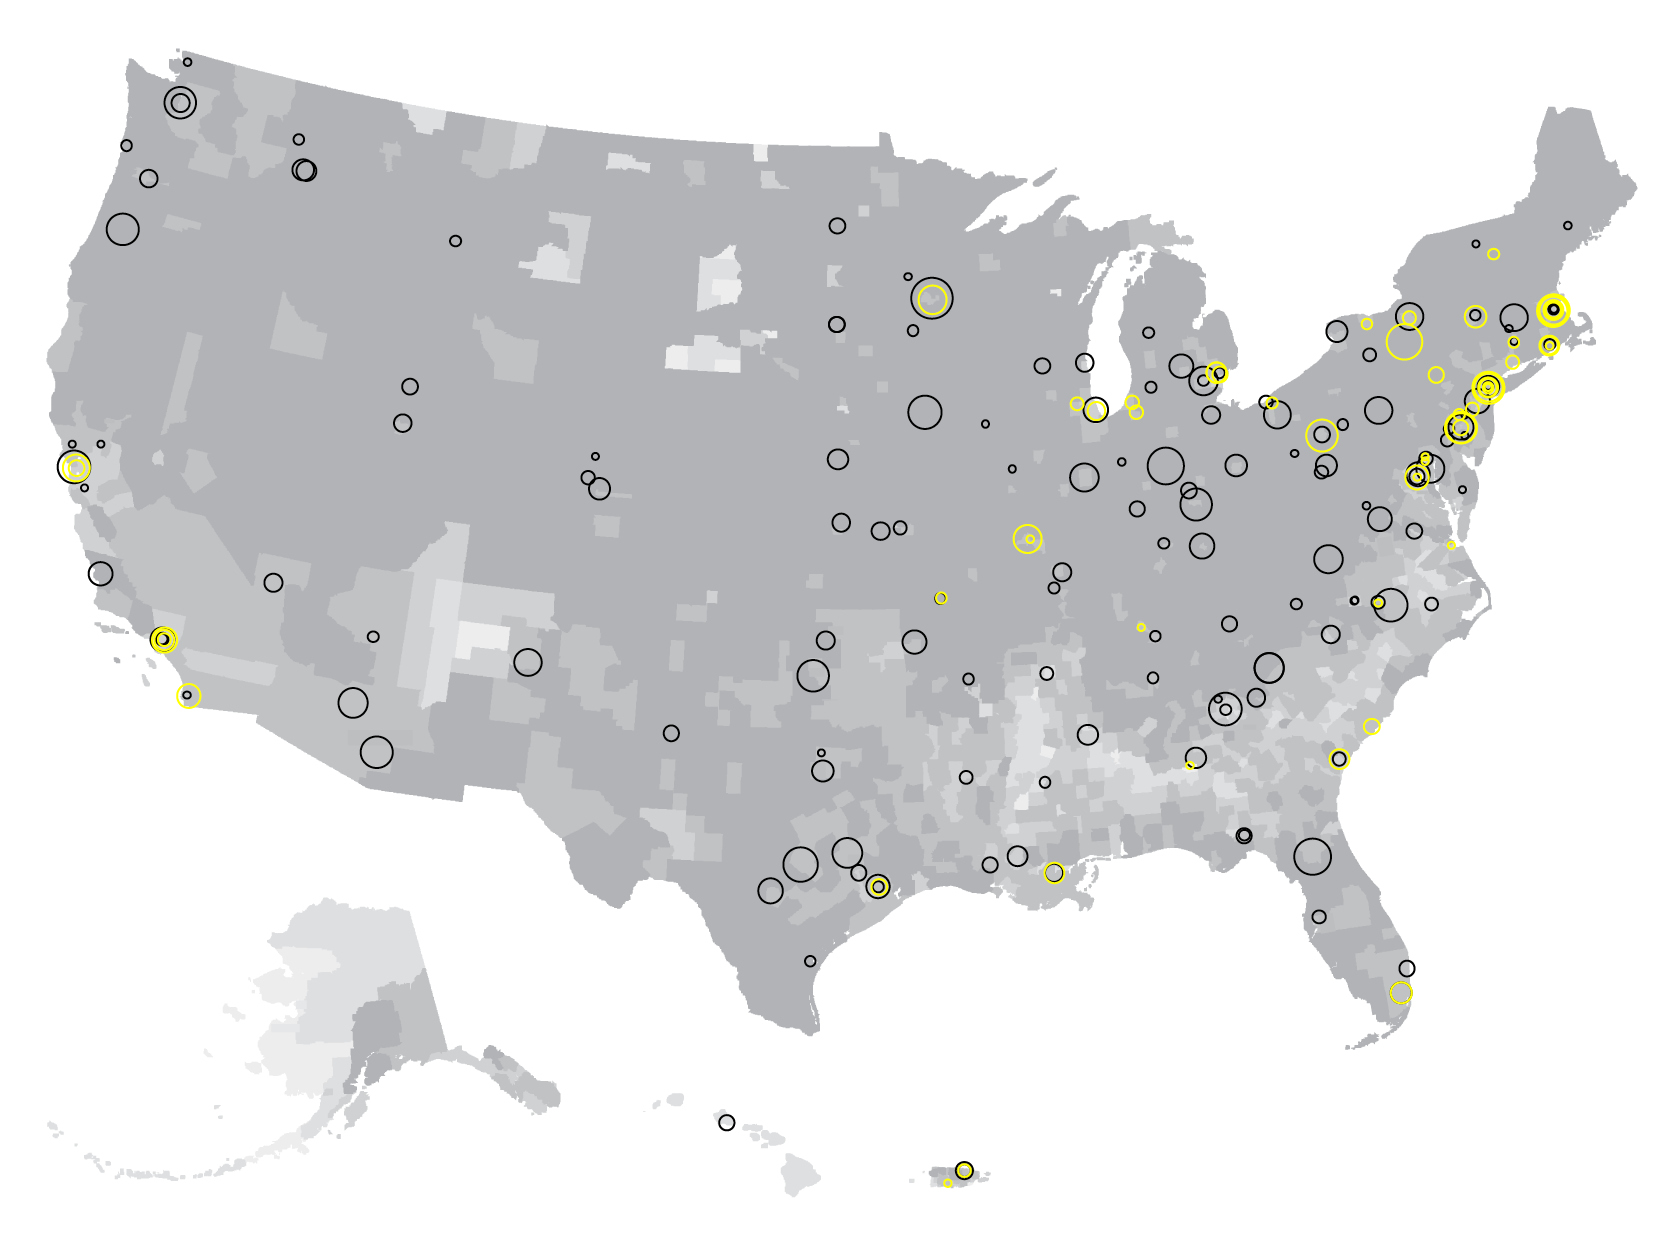 A grey US map shows scattered locations for public and private programs of the built environment, with a gradient indicating relative proportion of the White population across the country.